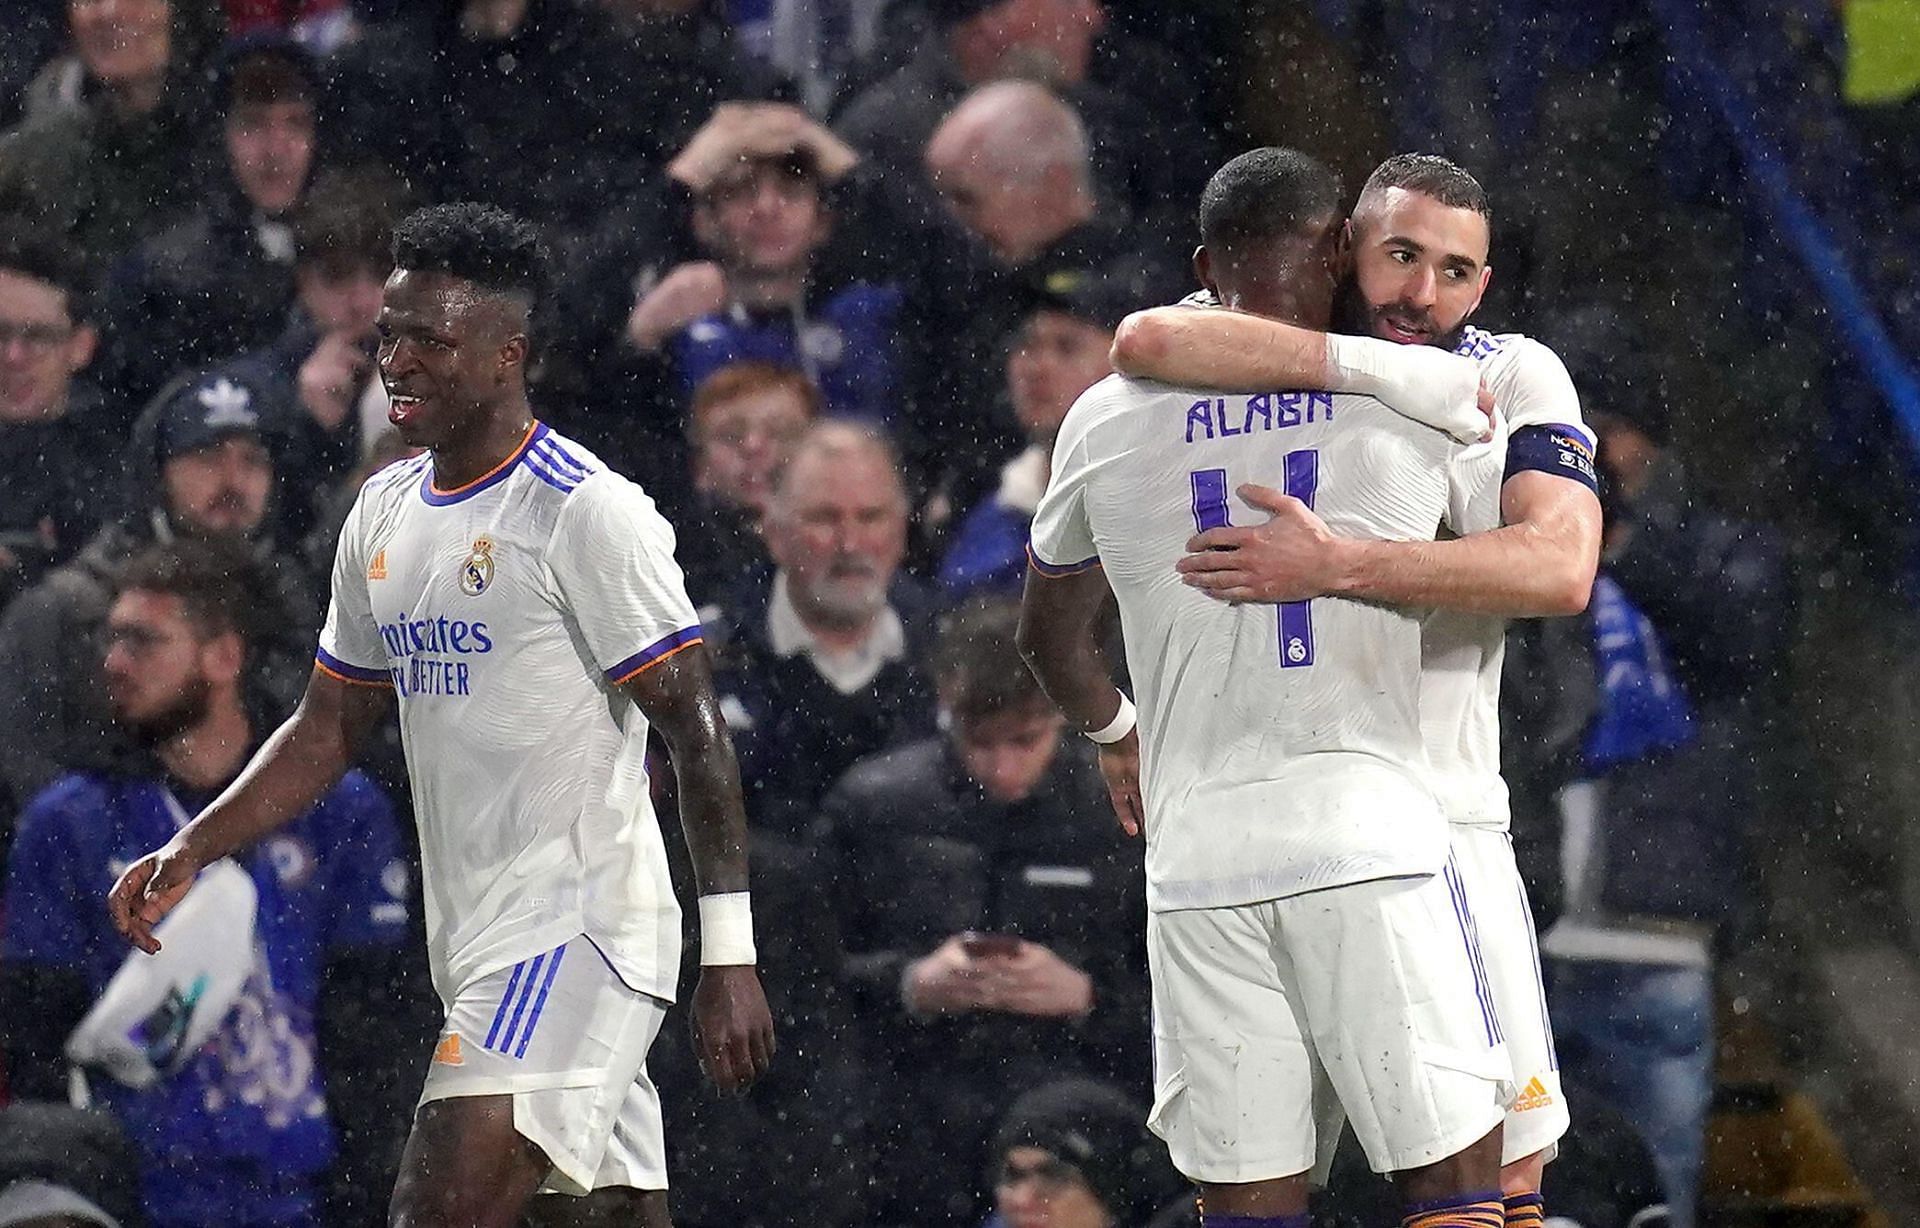 Real Madrid put up a clinical performance against Chelsea at Stamford Bridge